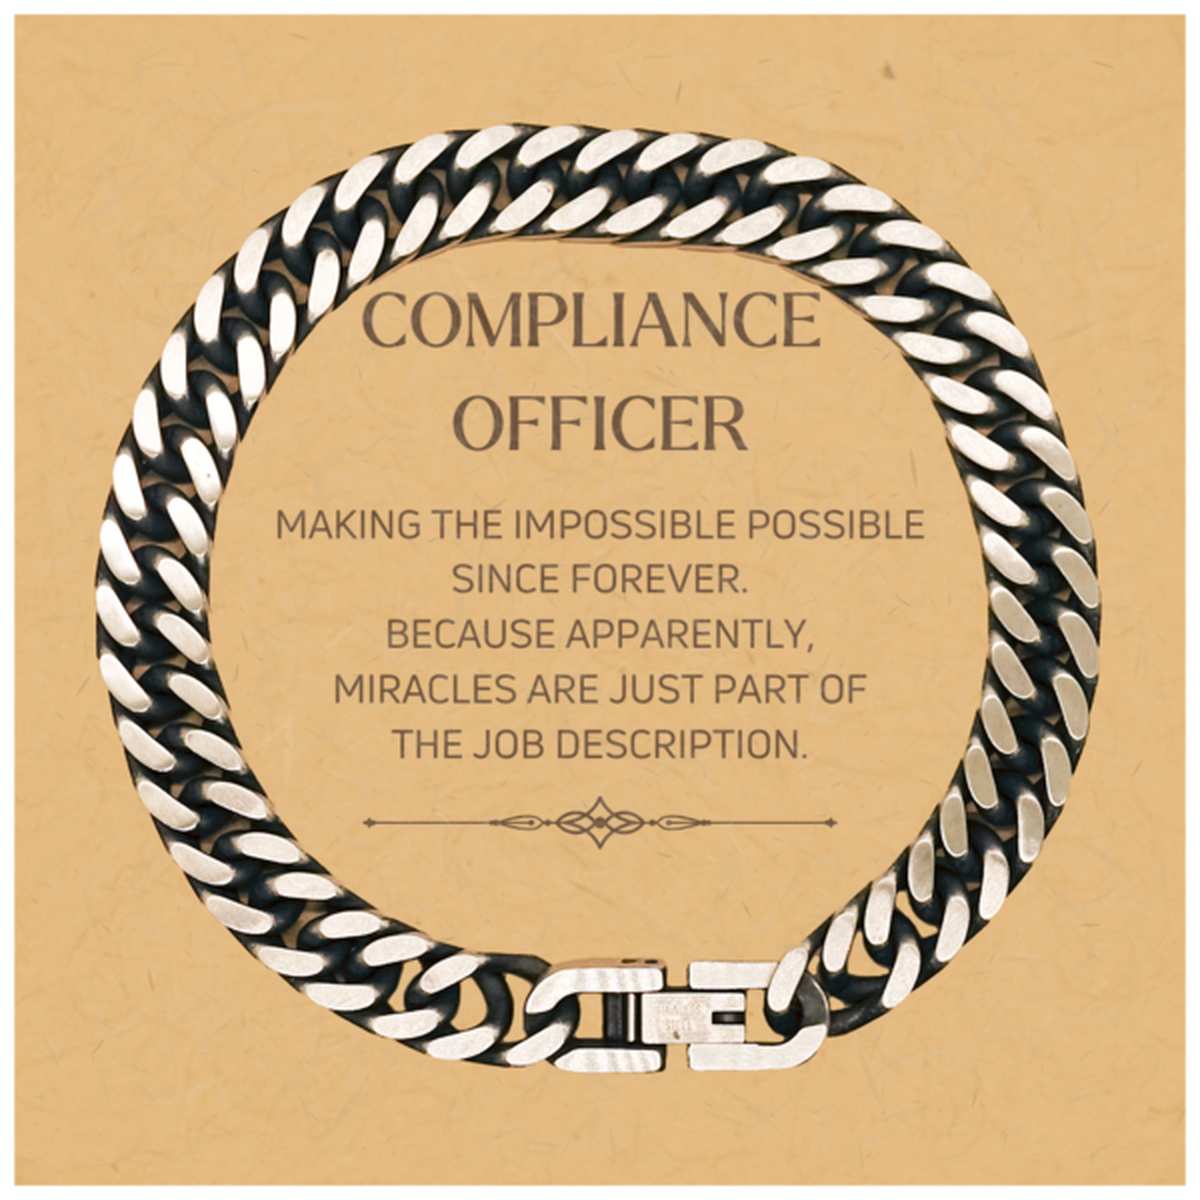 Funny Compliance Officer Gifts, Miracles are just part of the job description, Inspirational Birthday Christmas Cuban Link Chain Bracelet For Compliance Officer, Men, Women, Coworkers, Friends, Boss